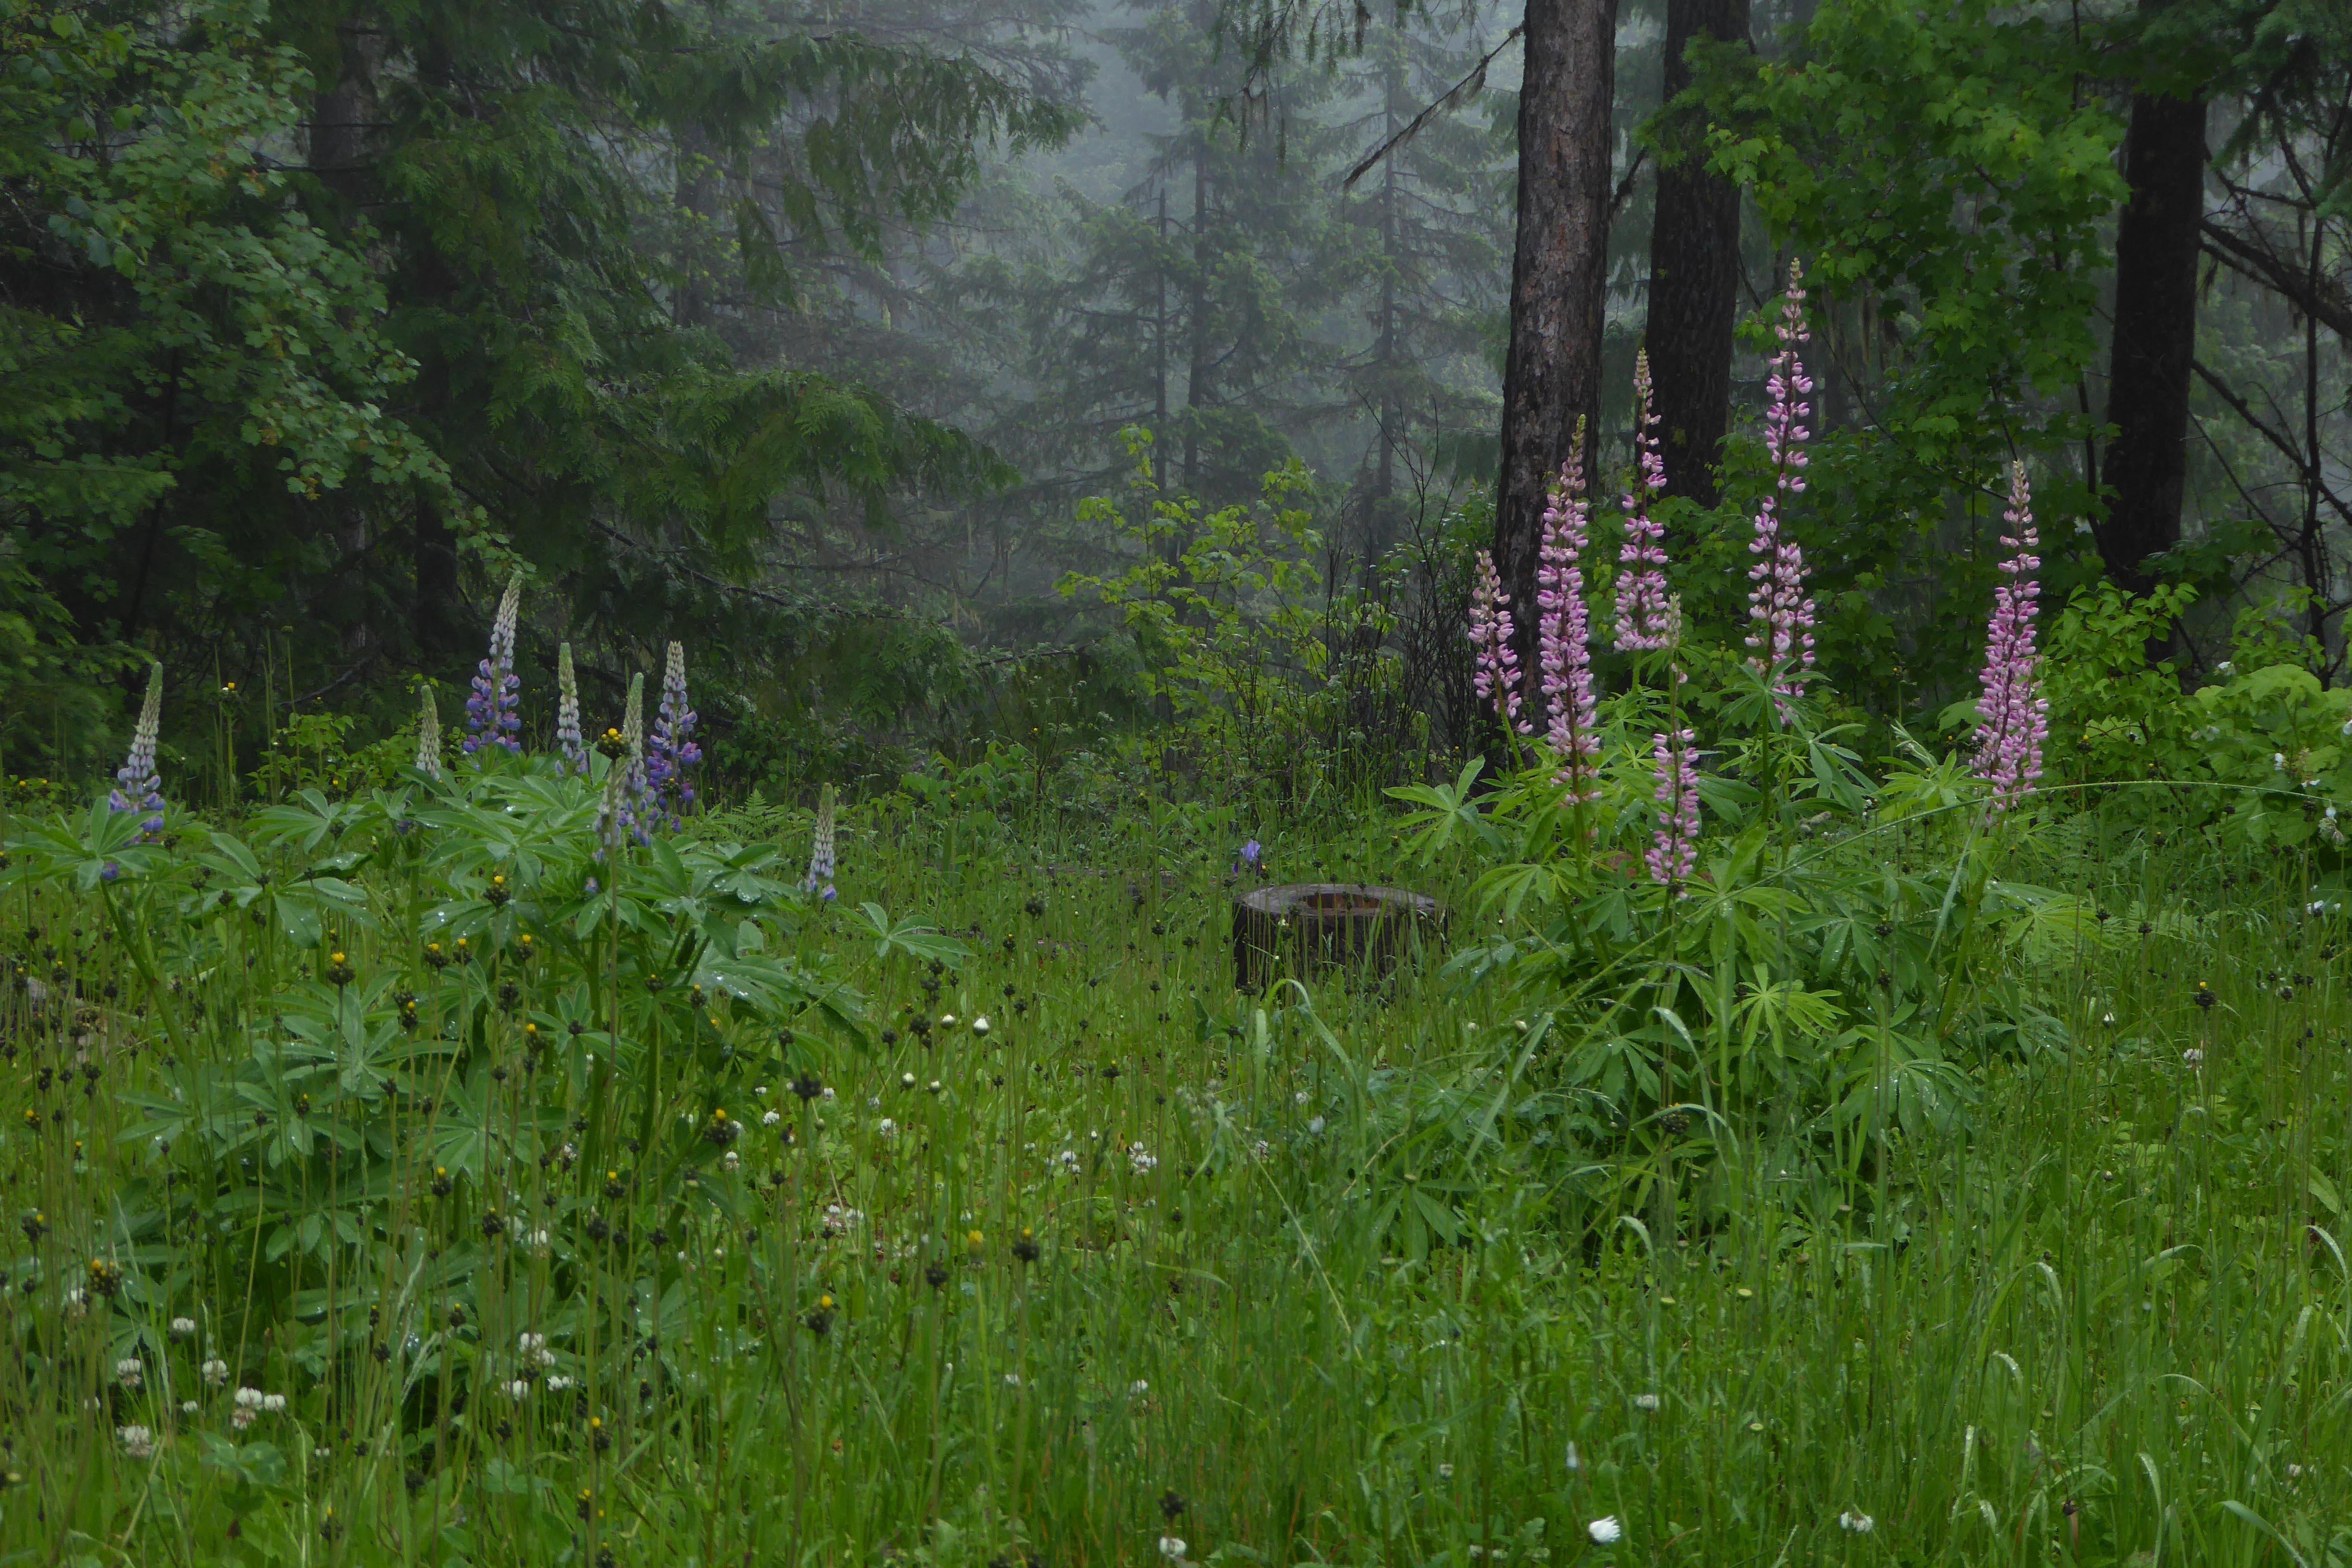 lupines